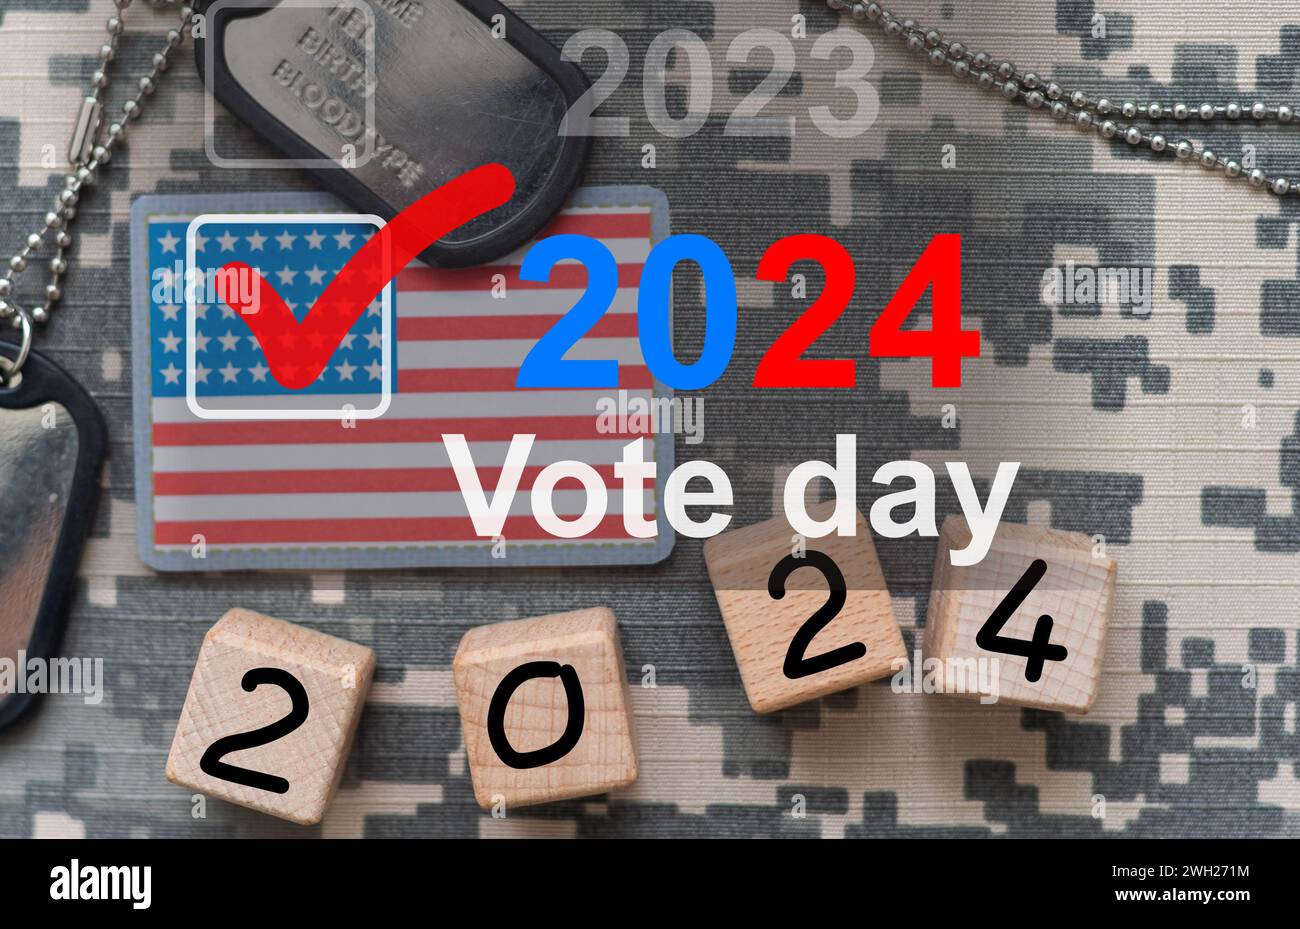 2024 United States of America presidential election vote banner. Stock Photo